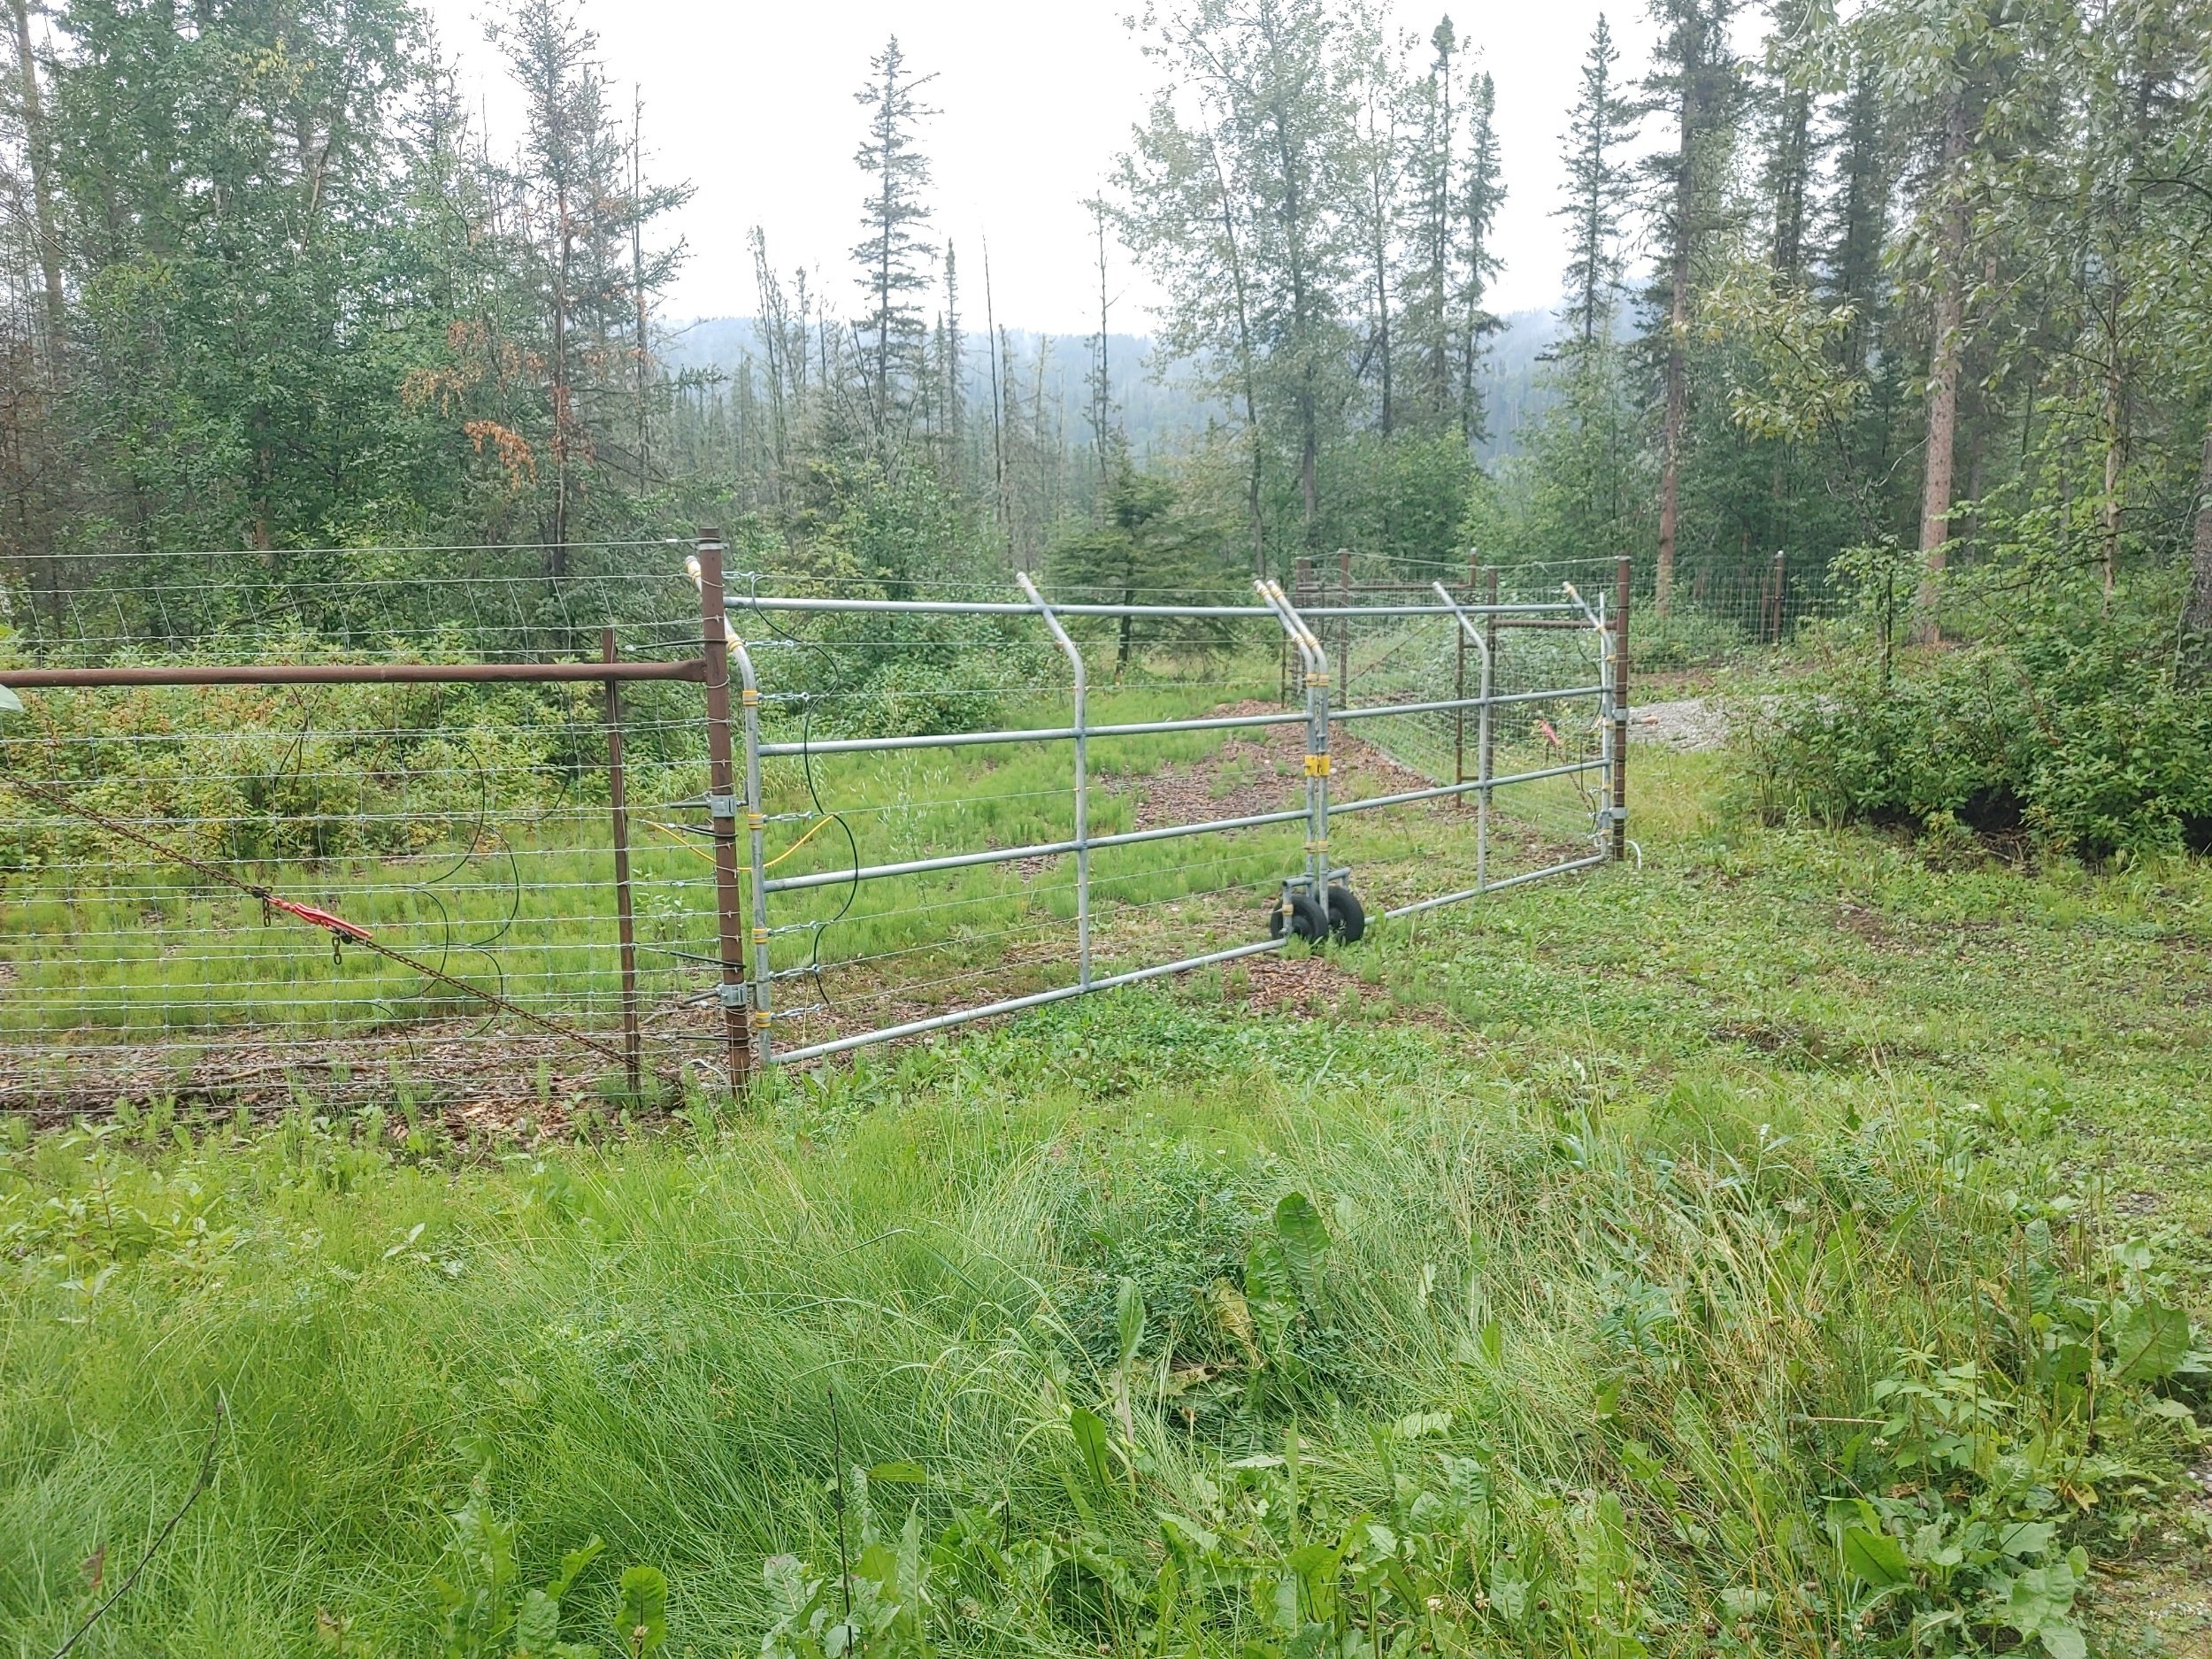  Bear cage [for us, keep them out of camp site] 